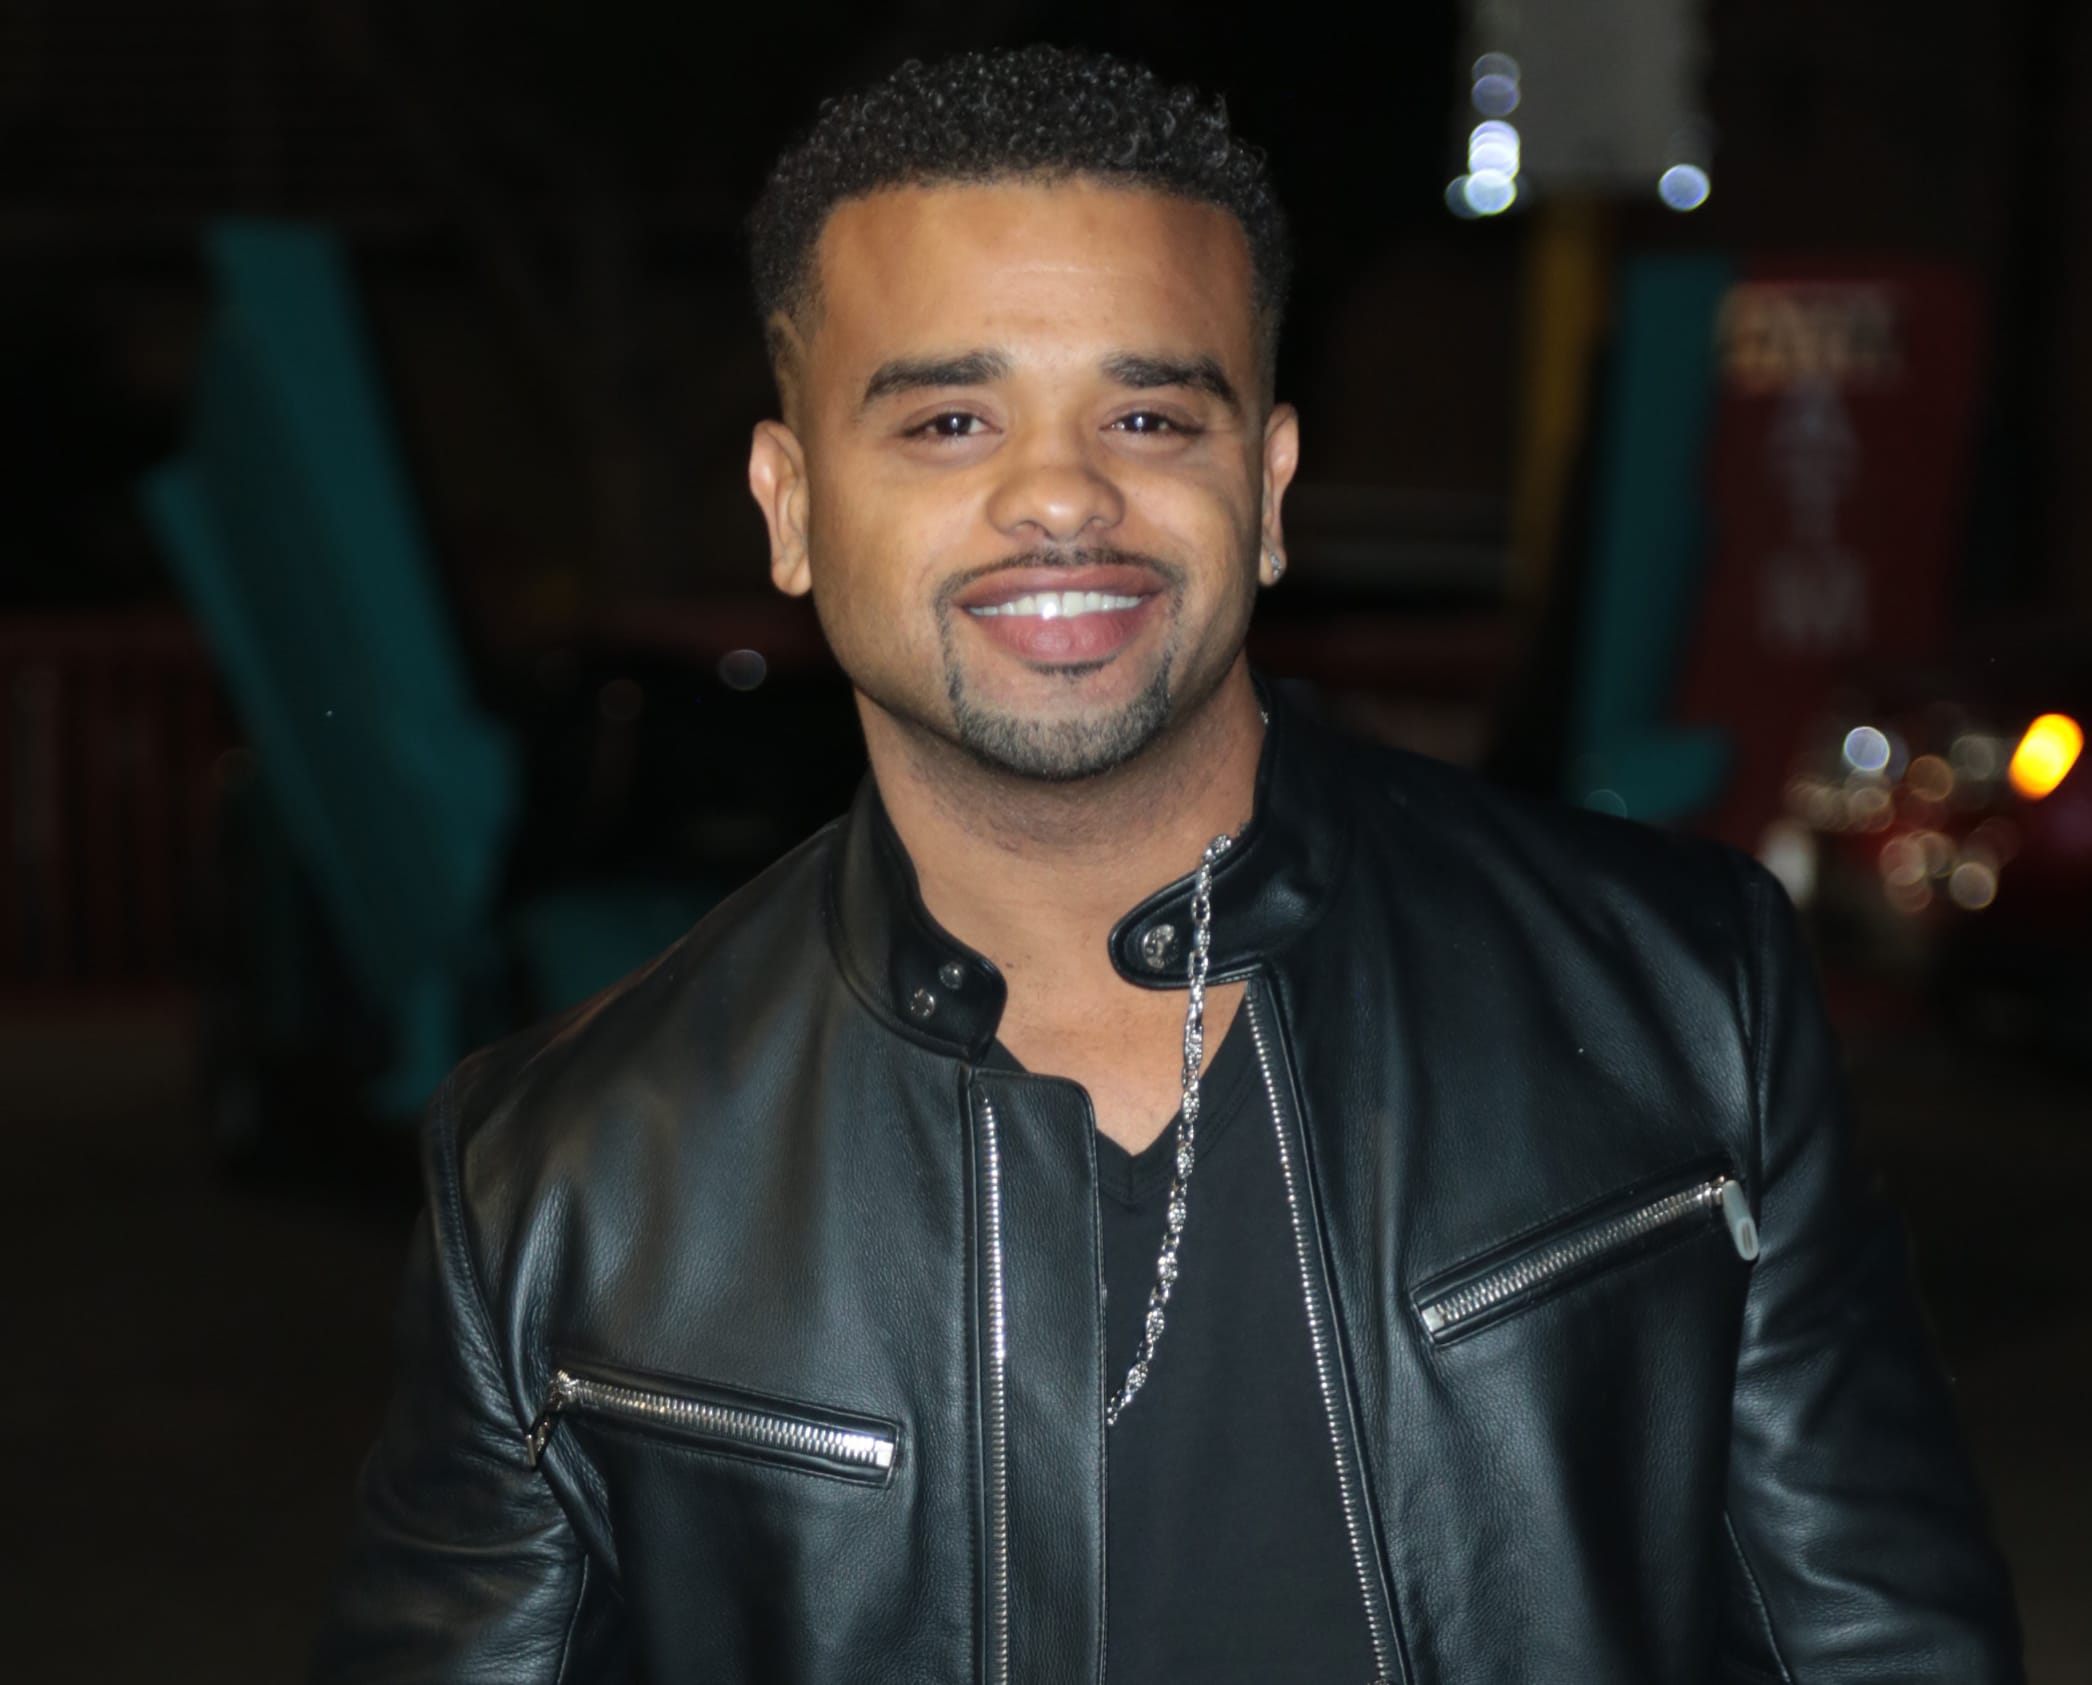 Raz B Breaks His Silence On Domestic Violence Charges